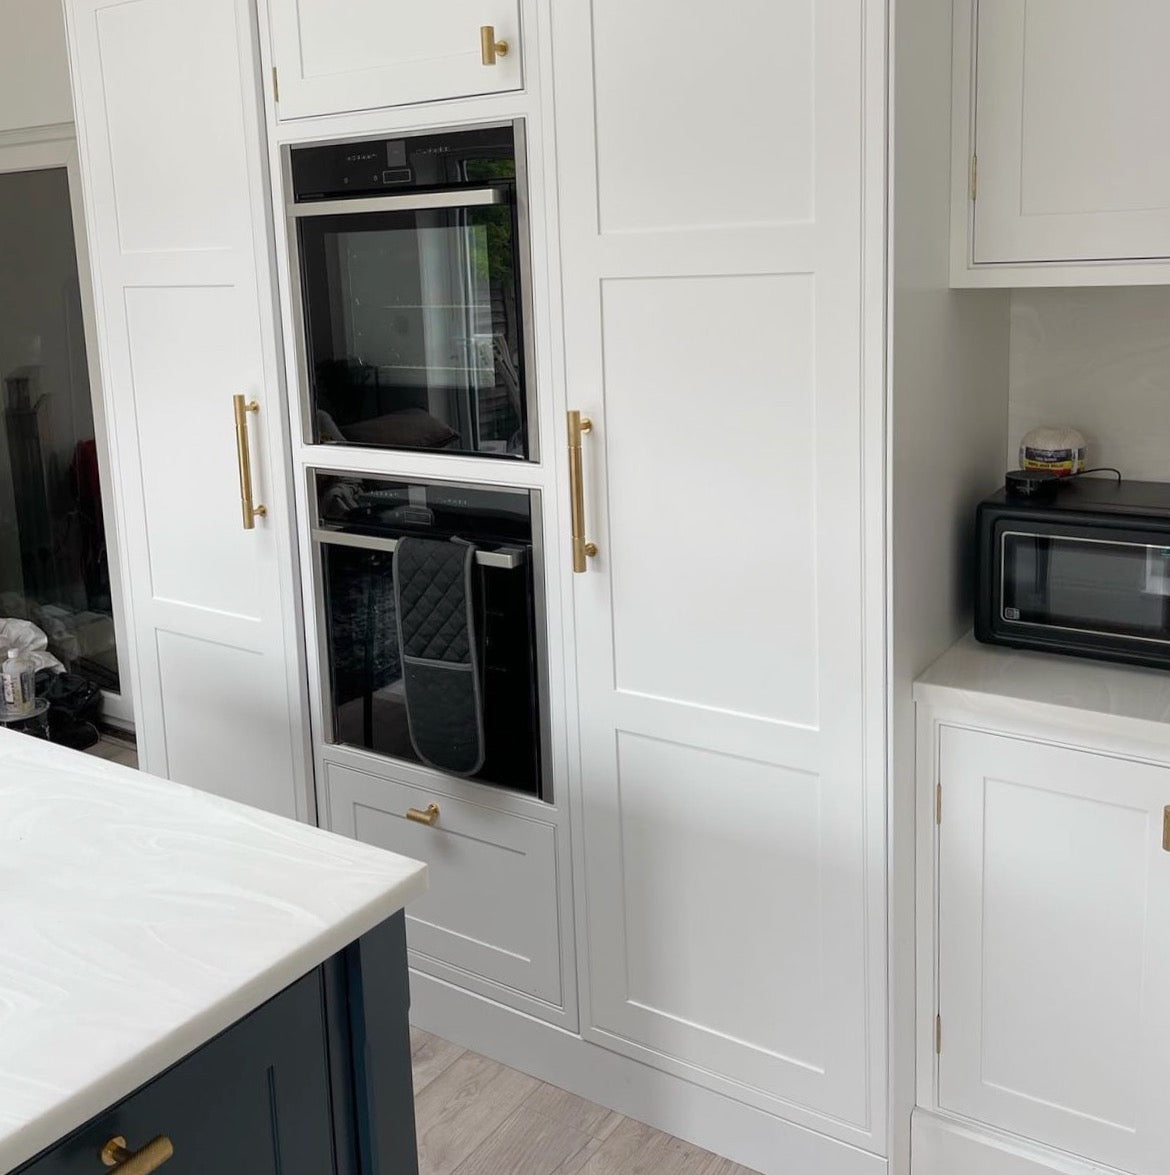 satin brass knurled pull handle by aspect joinery based in kent. modern shaker cabinetry doors for small kitchen paired with satin brass rounded Riverhead t-bars 